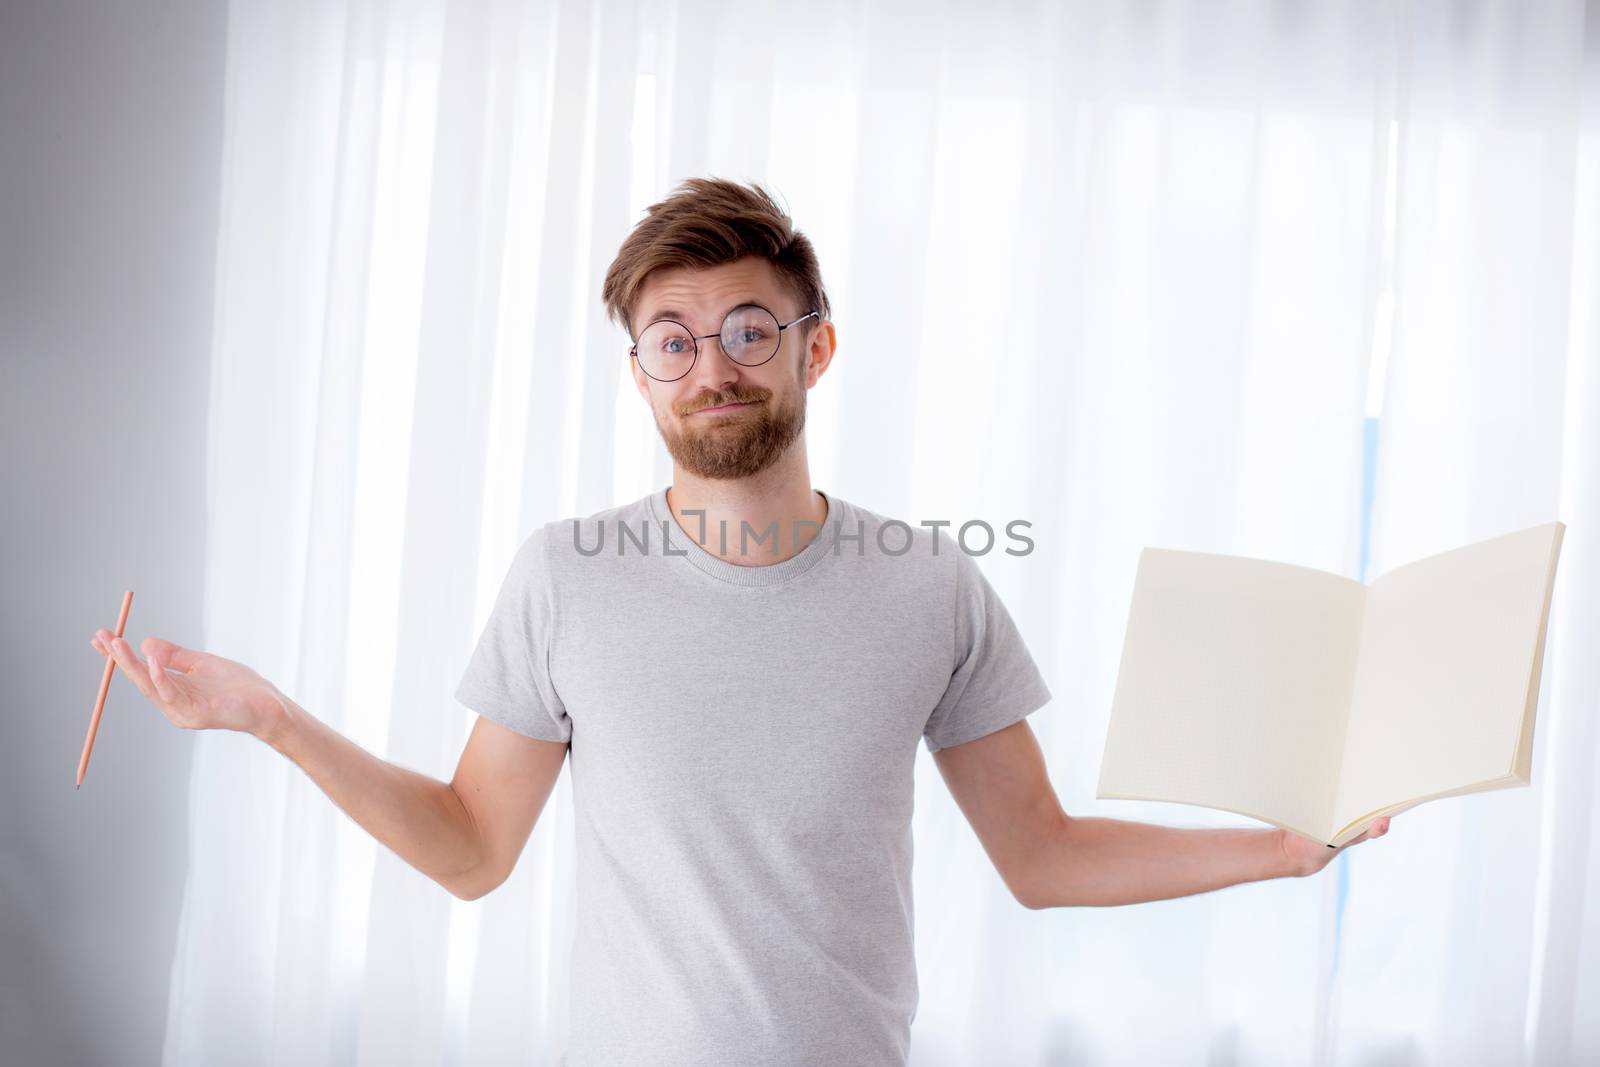 student man wear glasses holding a book empty with smiling happi by nnudoo